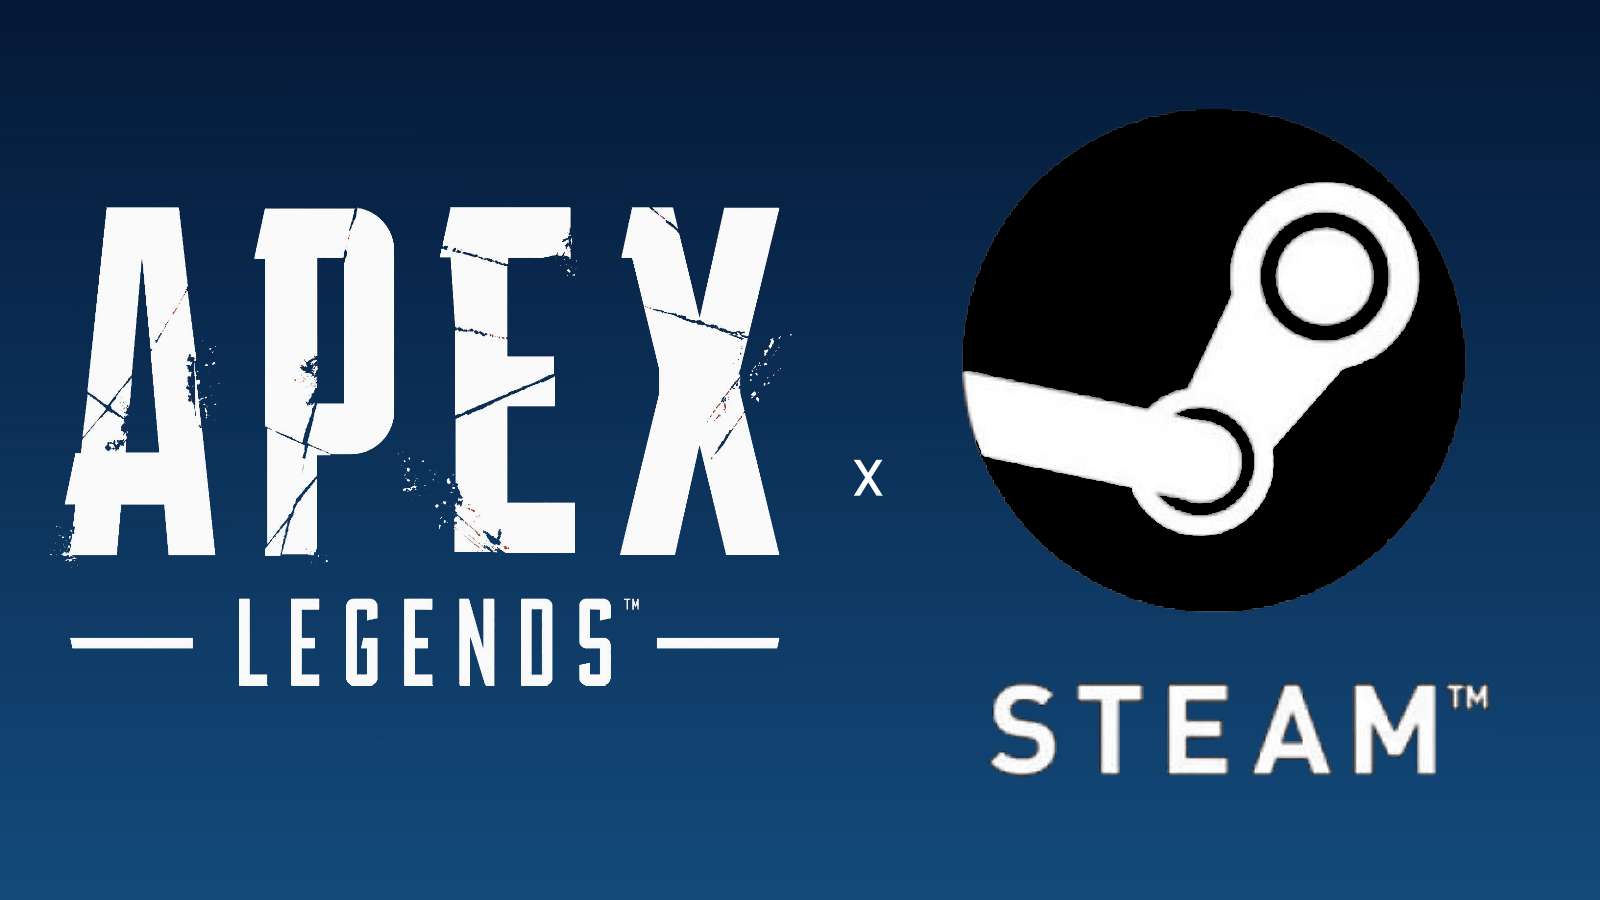 Apex Legends and Steam logos on blue background